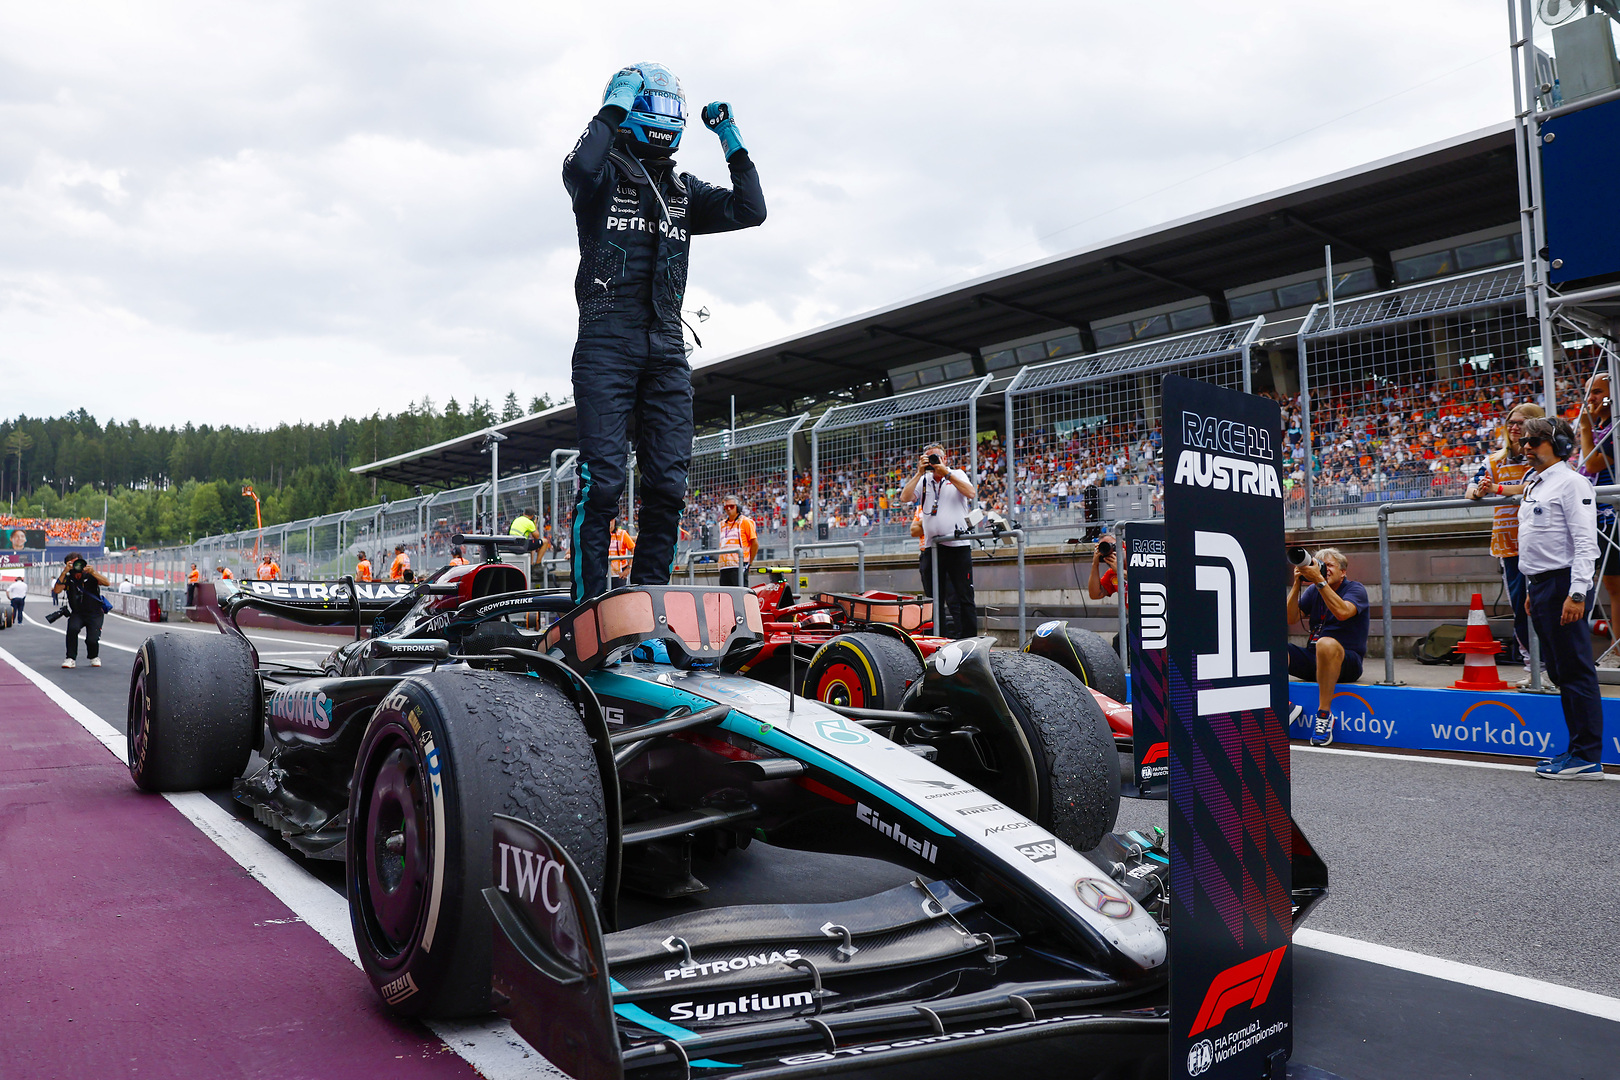 <div>‘You Can Win This!’ - Wolff's radio blunder almost crashed Russell</div>